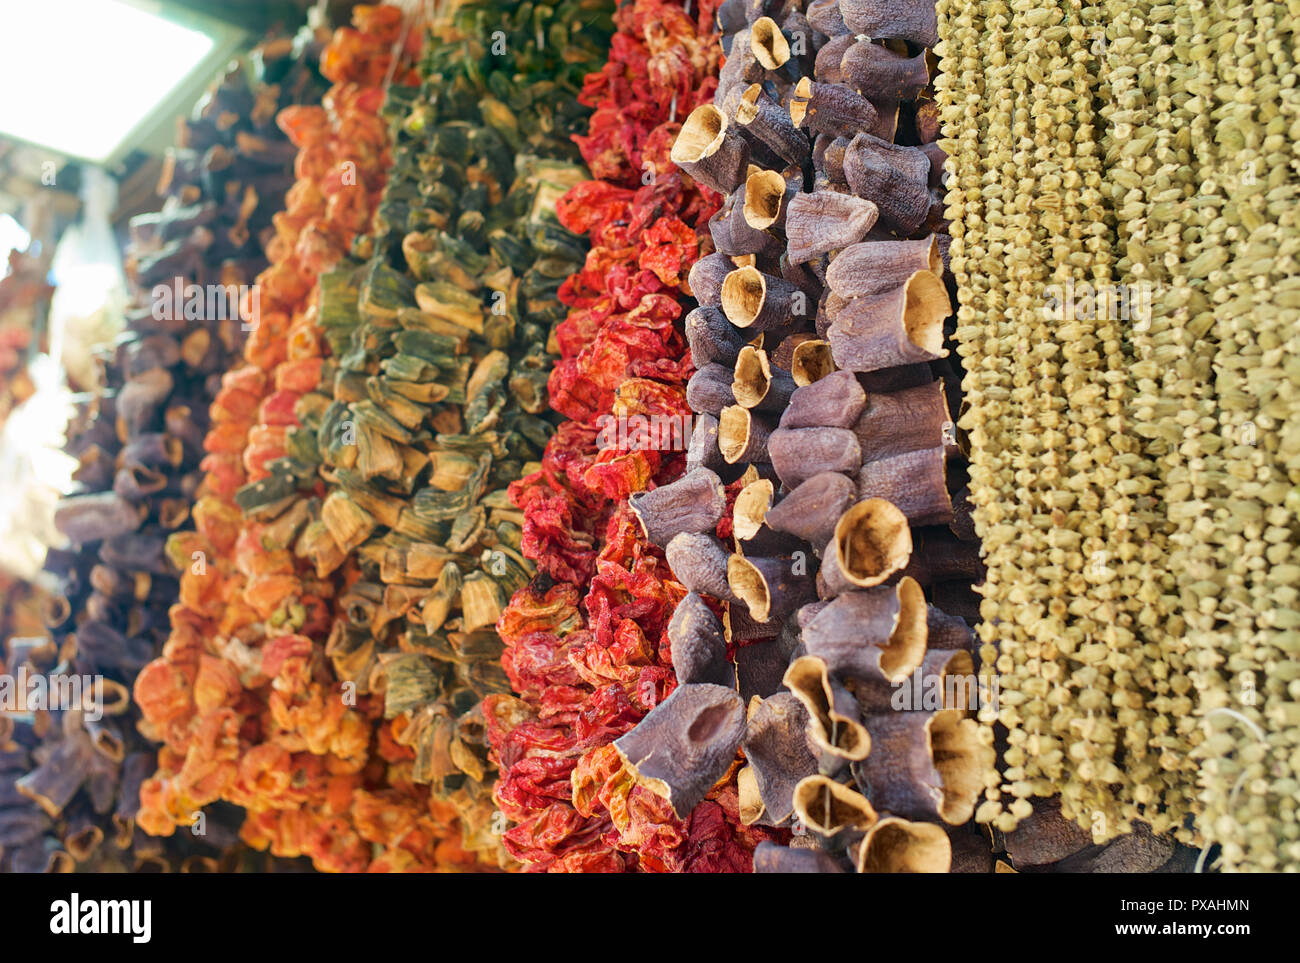 Dried Eggplants, Peppers, Tomatoes and Other Dried Vegetables Hanging on a String at the Egyptian Bazaar or Spice Bazaar in Istanbul, Turkey Stock Photo